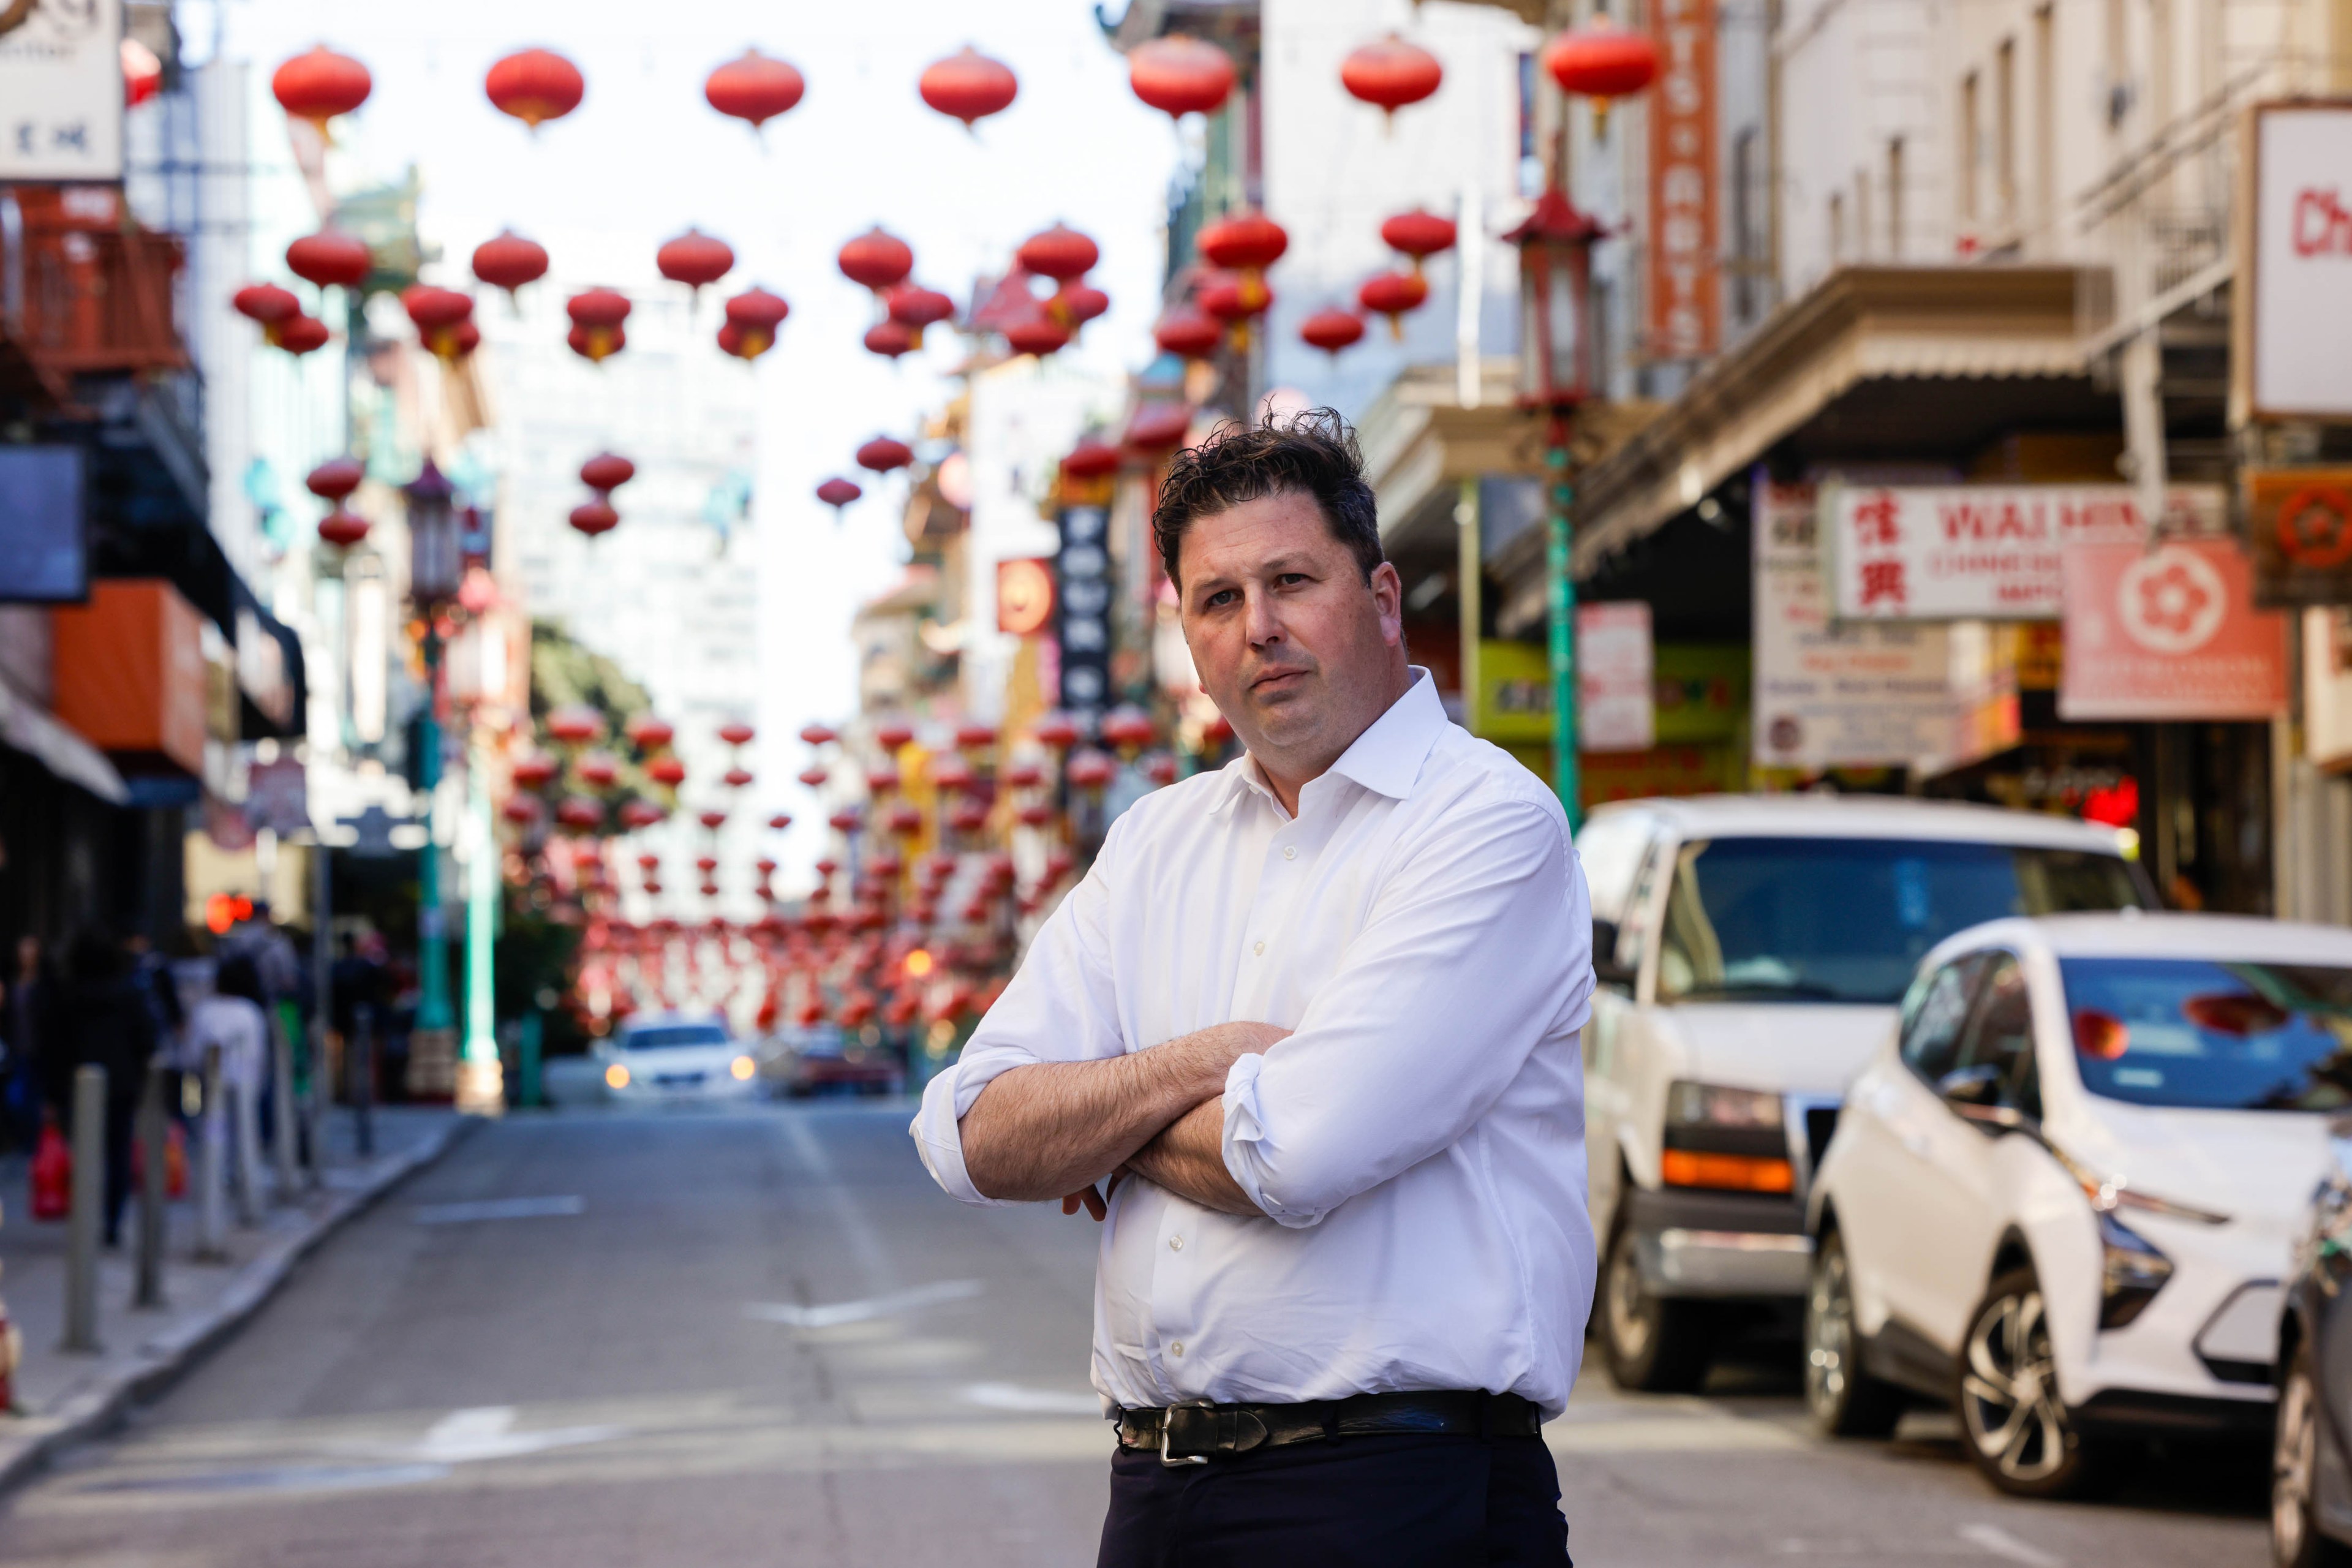 A man stands with crossed arms on a street lined with red lanterns and signs, possibly in Chinatown.